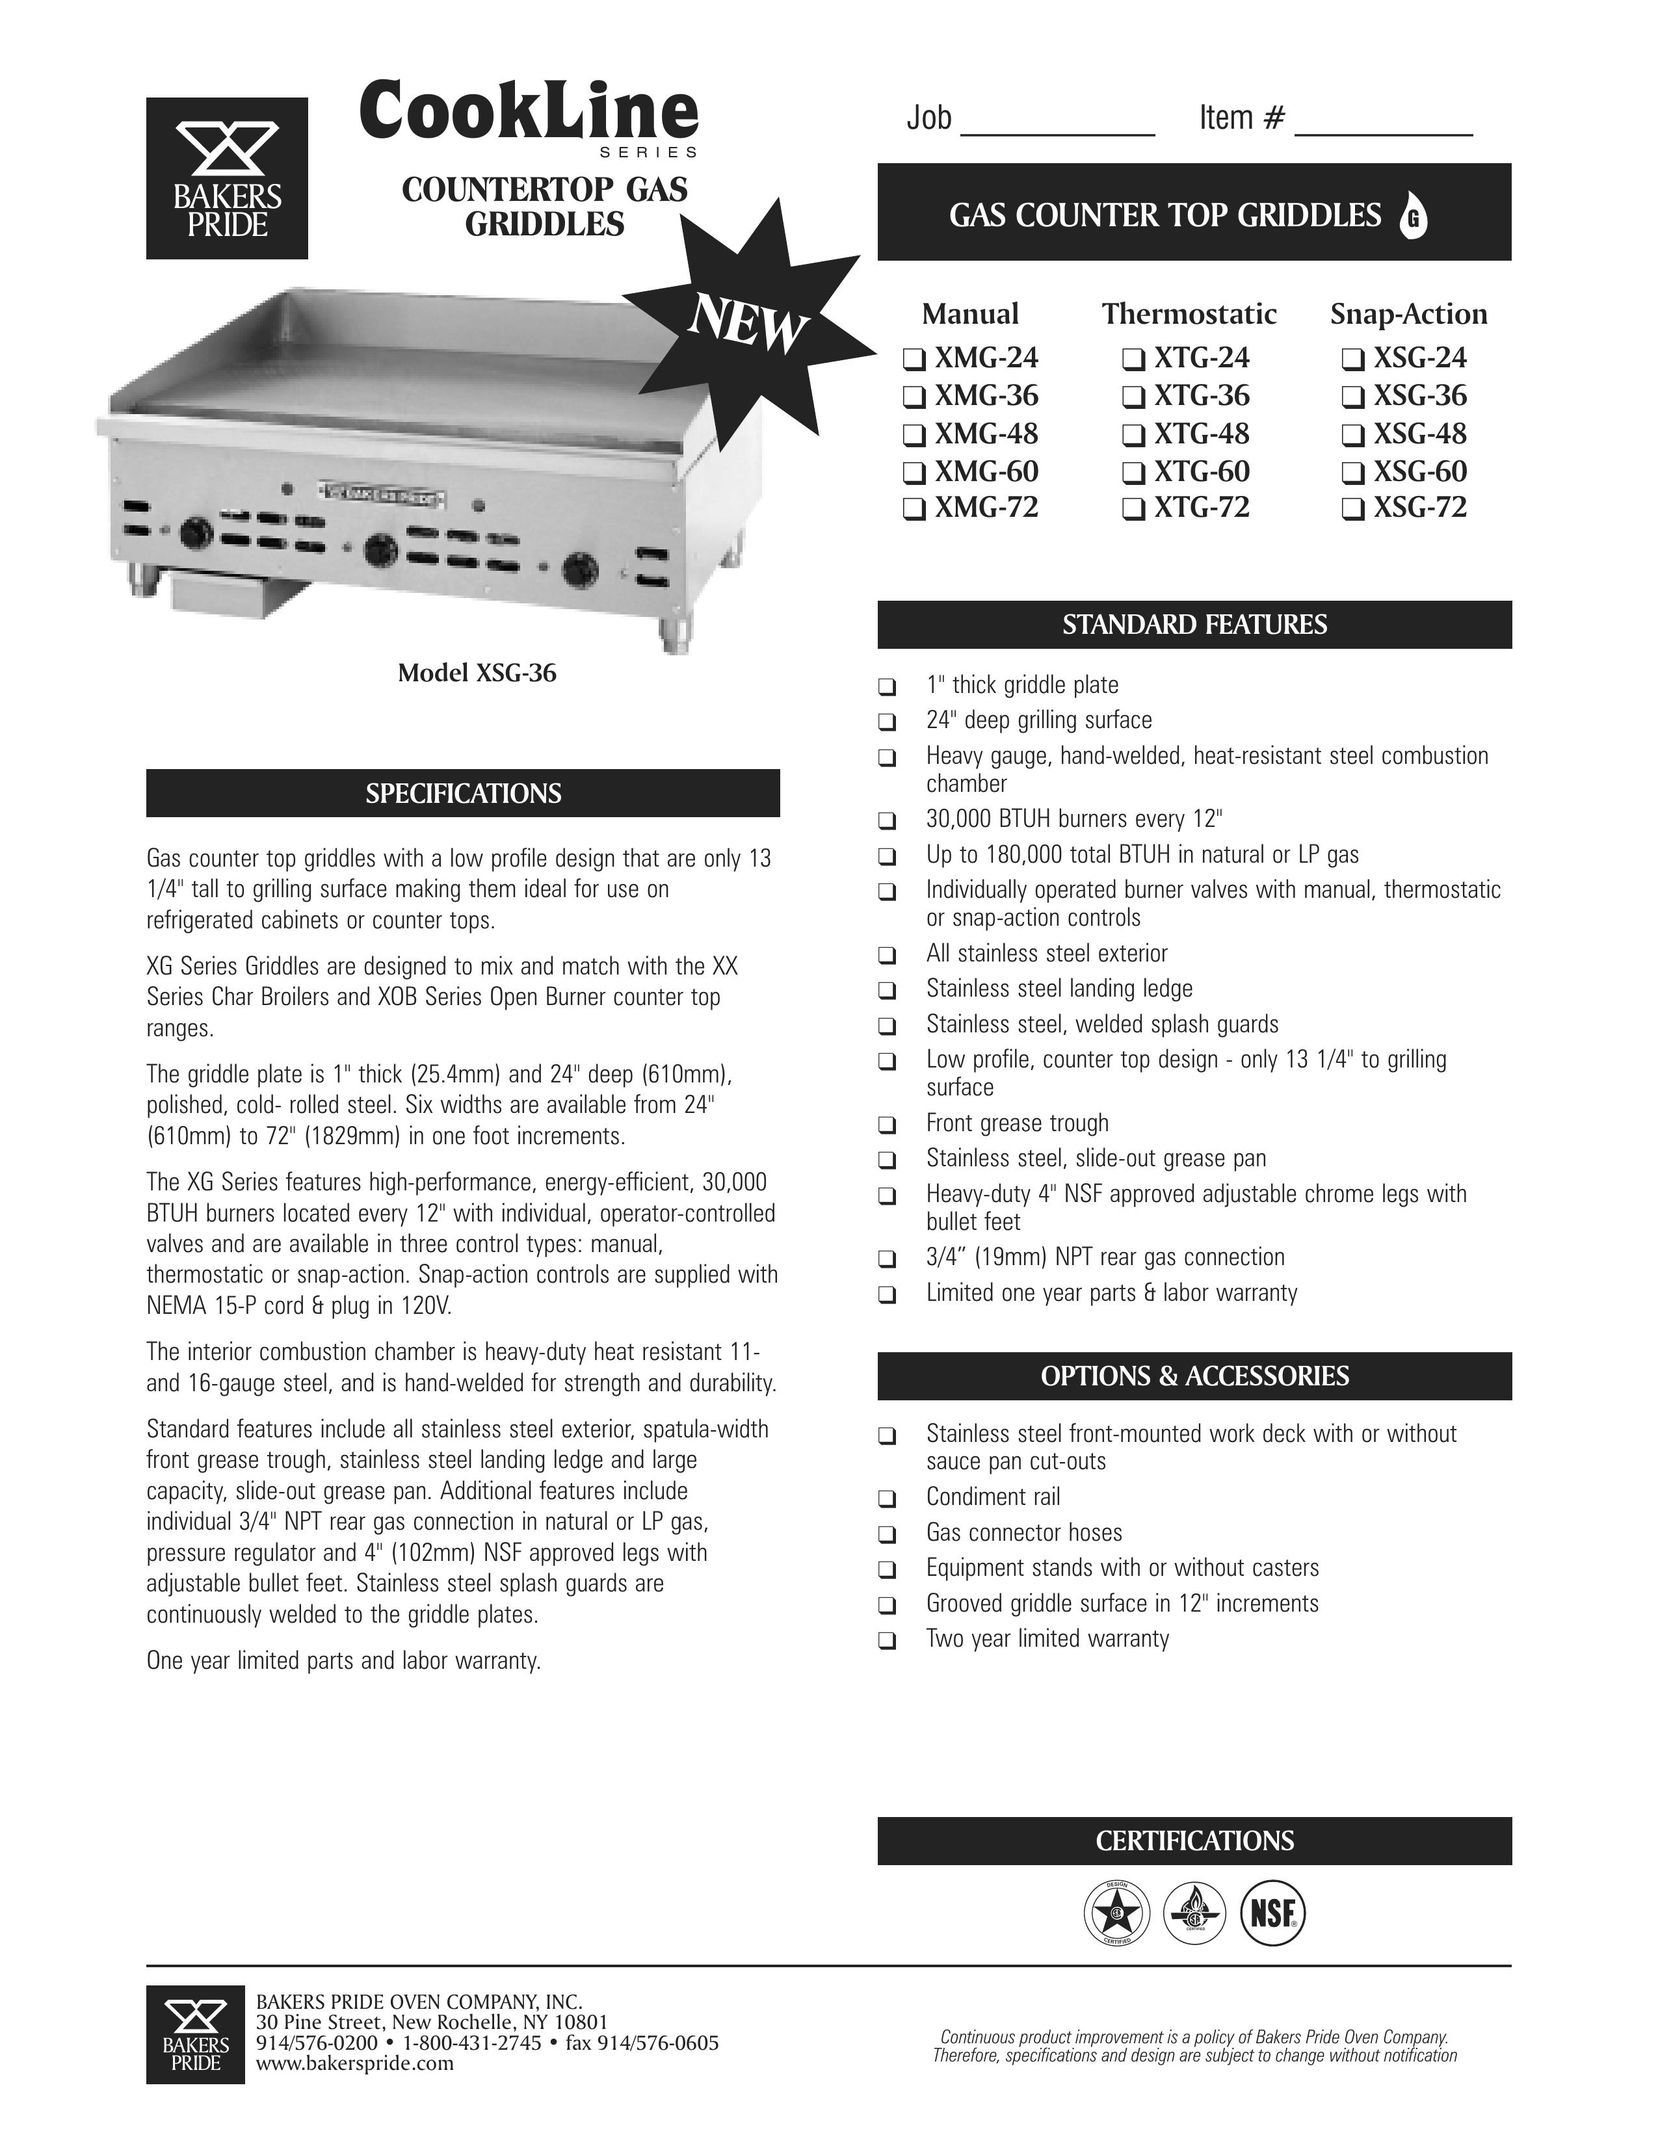 Bakers Pride Oven XSG-36 Griddle User Manual